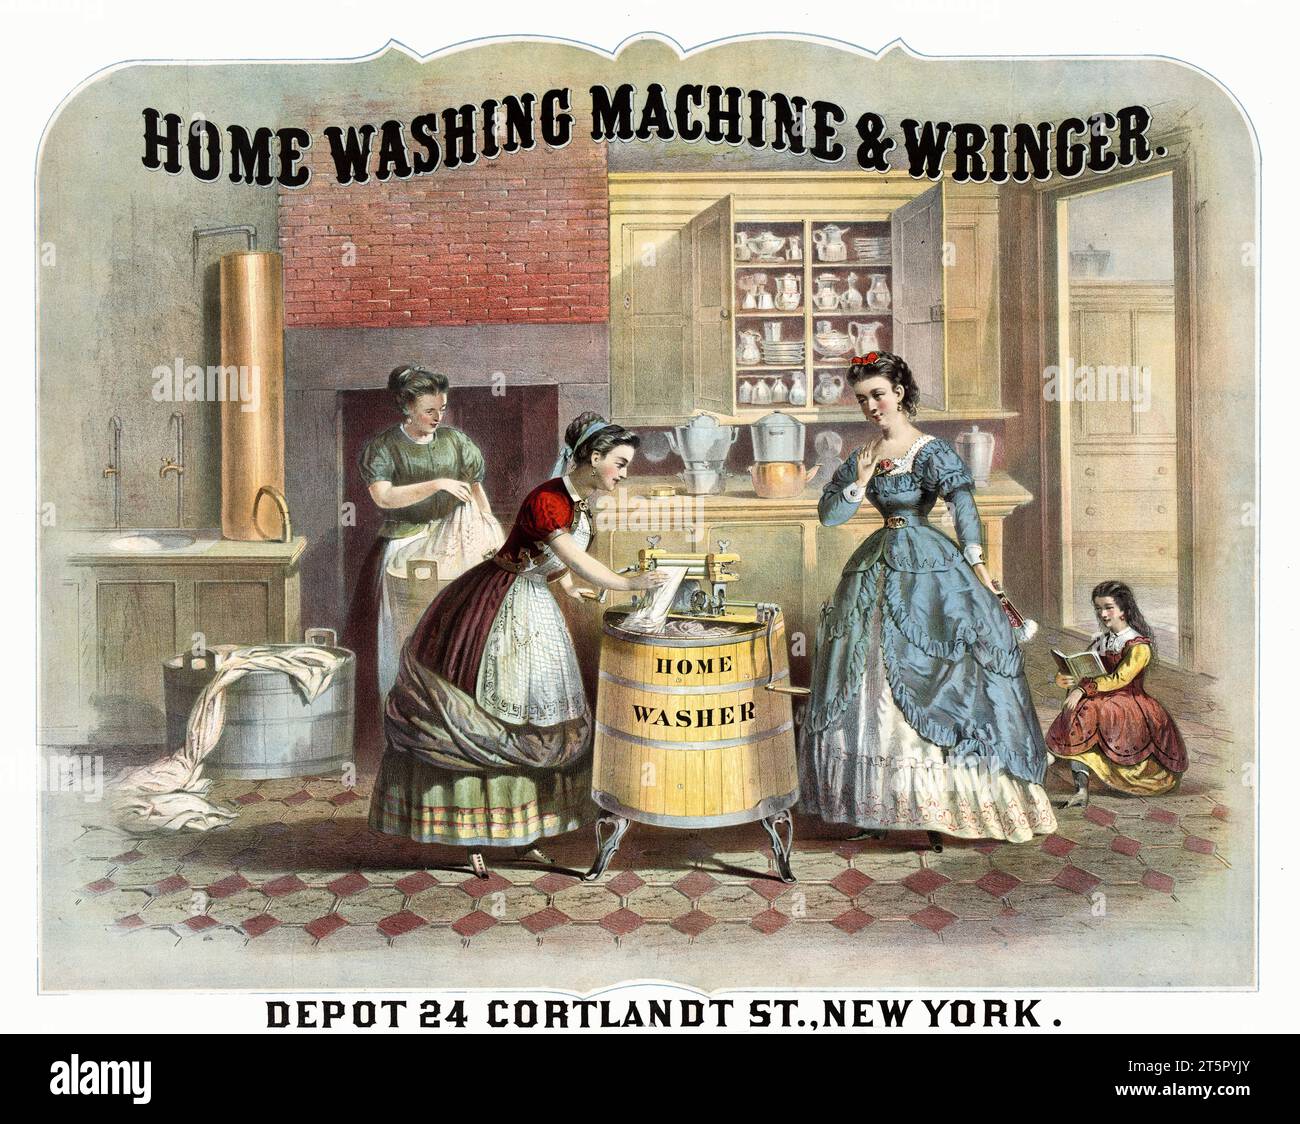 Old washing machine advertisement poster. By unidentified author, publ. in New York, ca 1869 Stock Photo